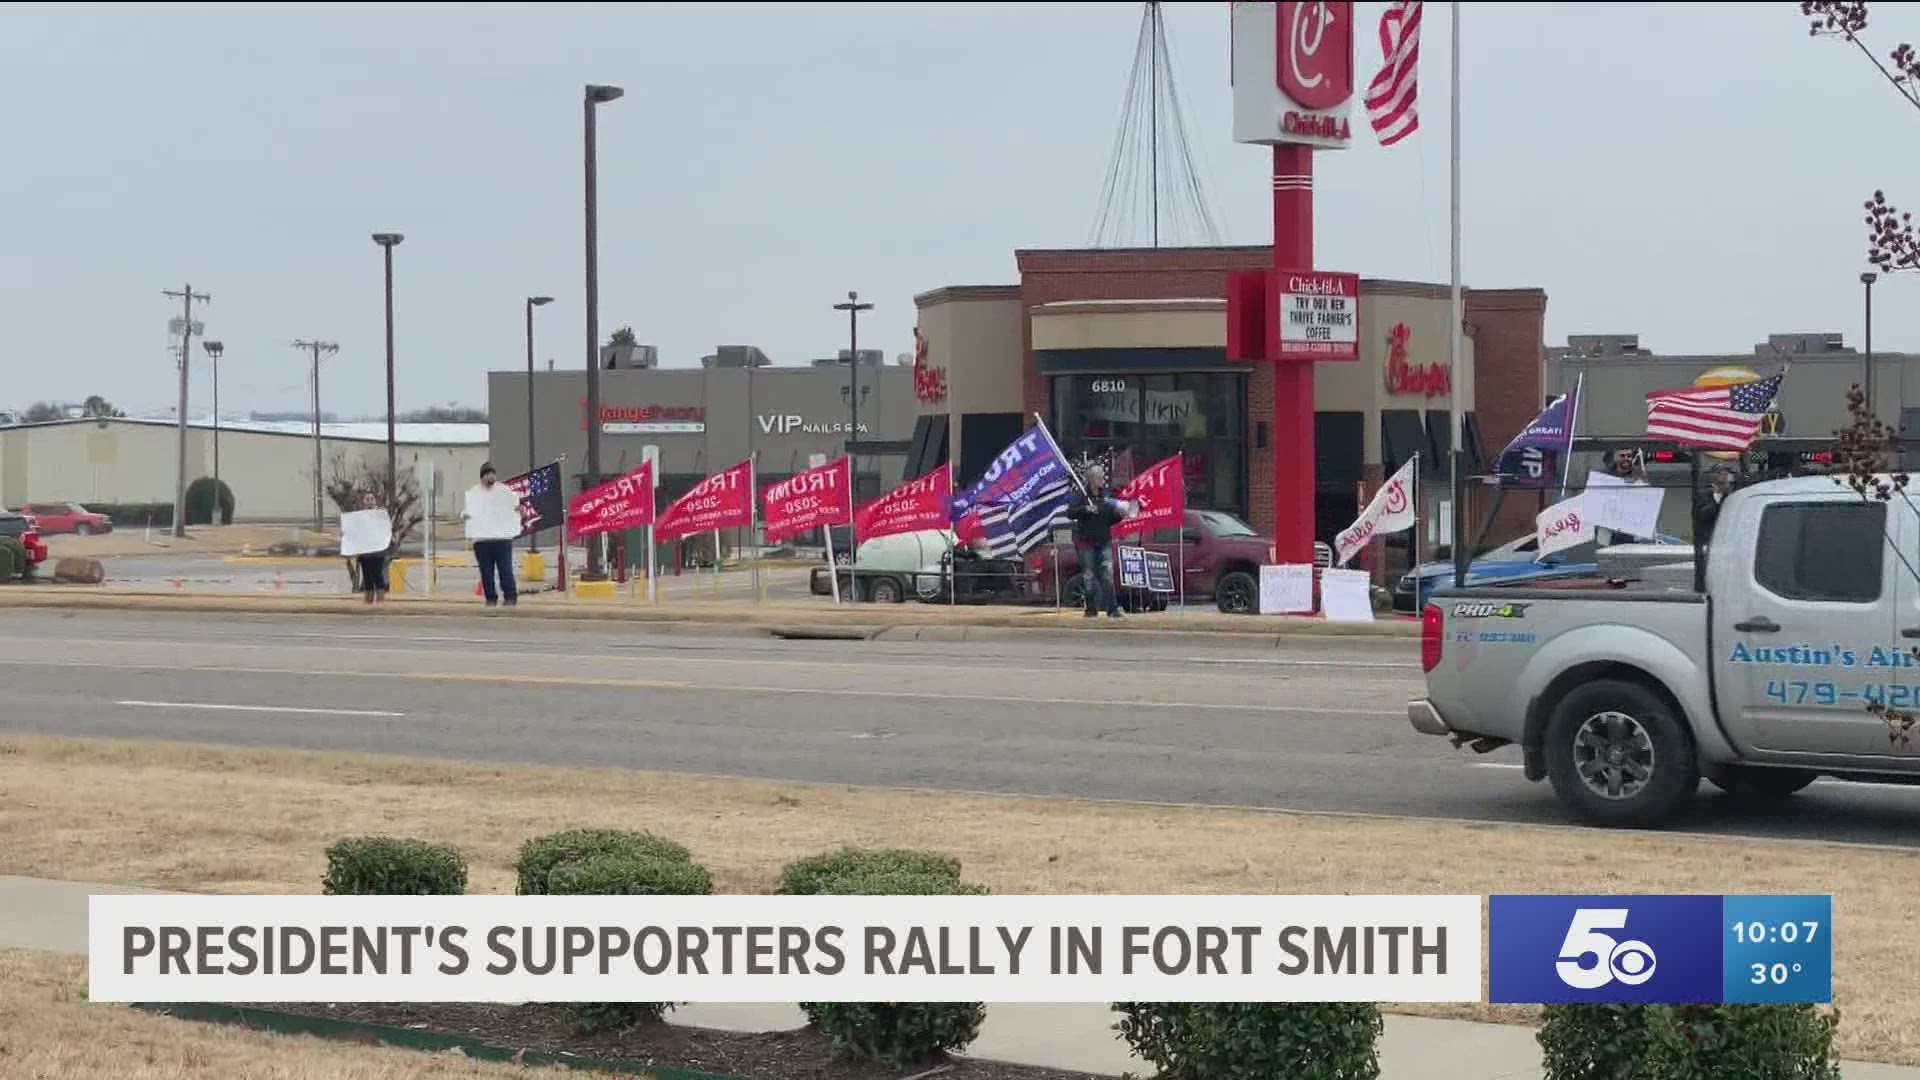 A trump rally was held in Fort Smith Sunday afternoon (Jan. 10) on Rogers Avenue.